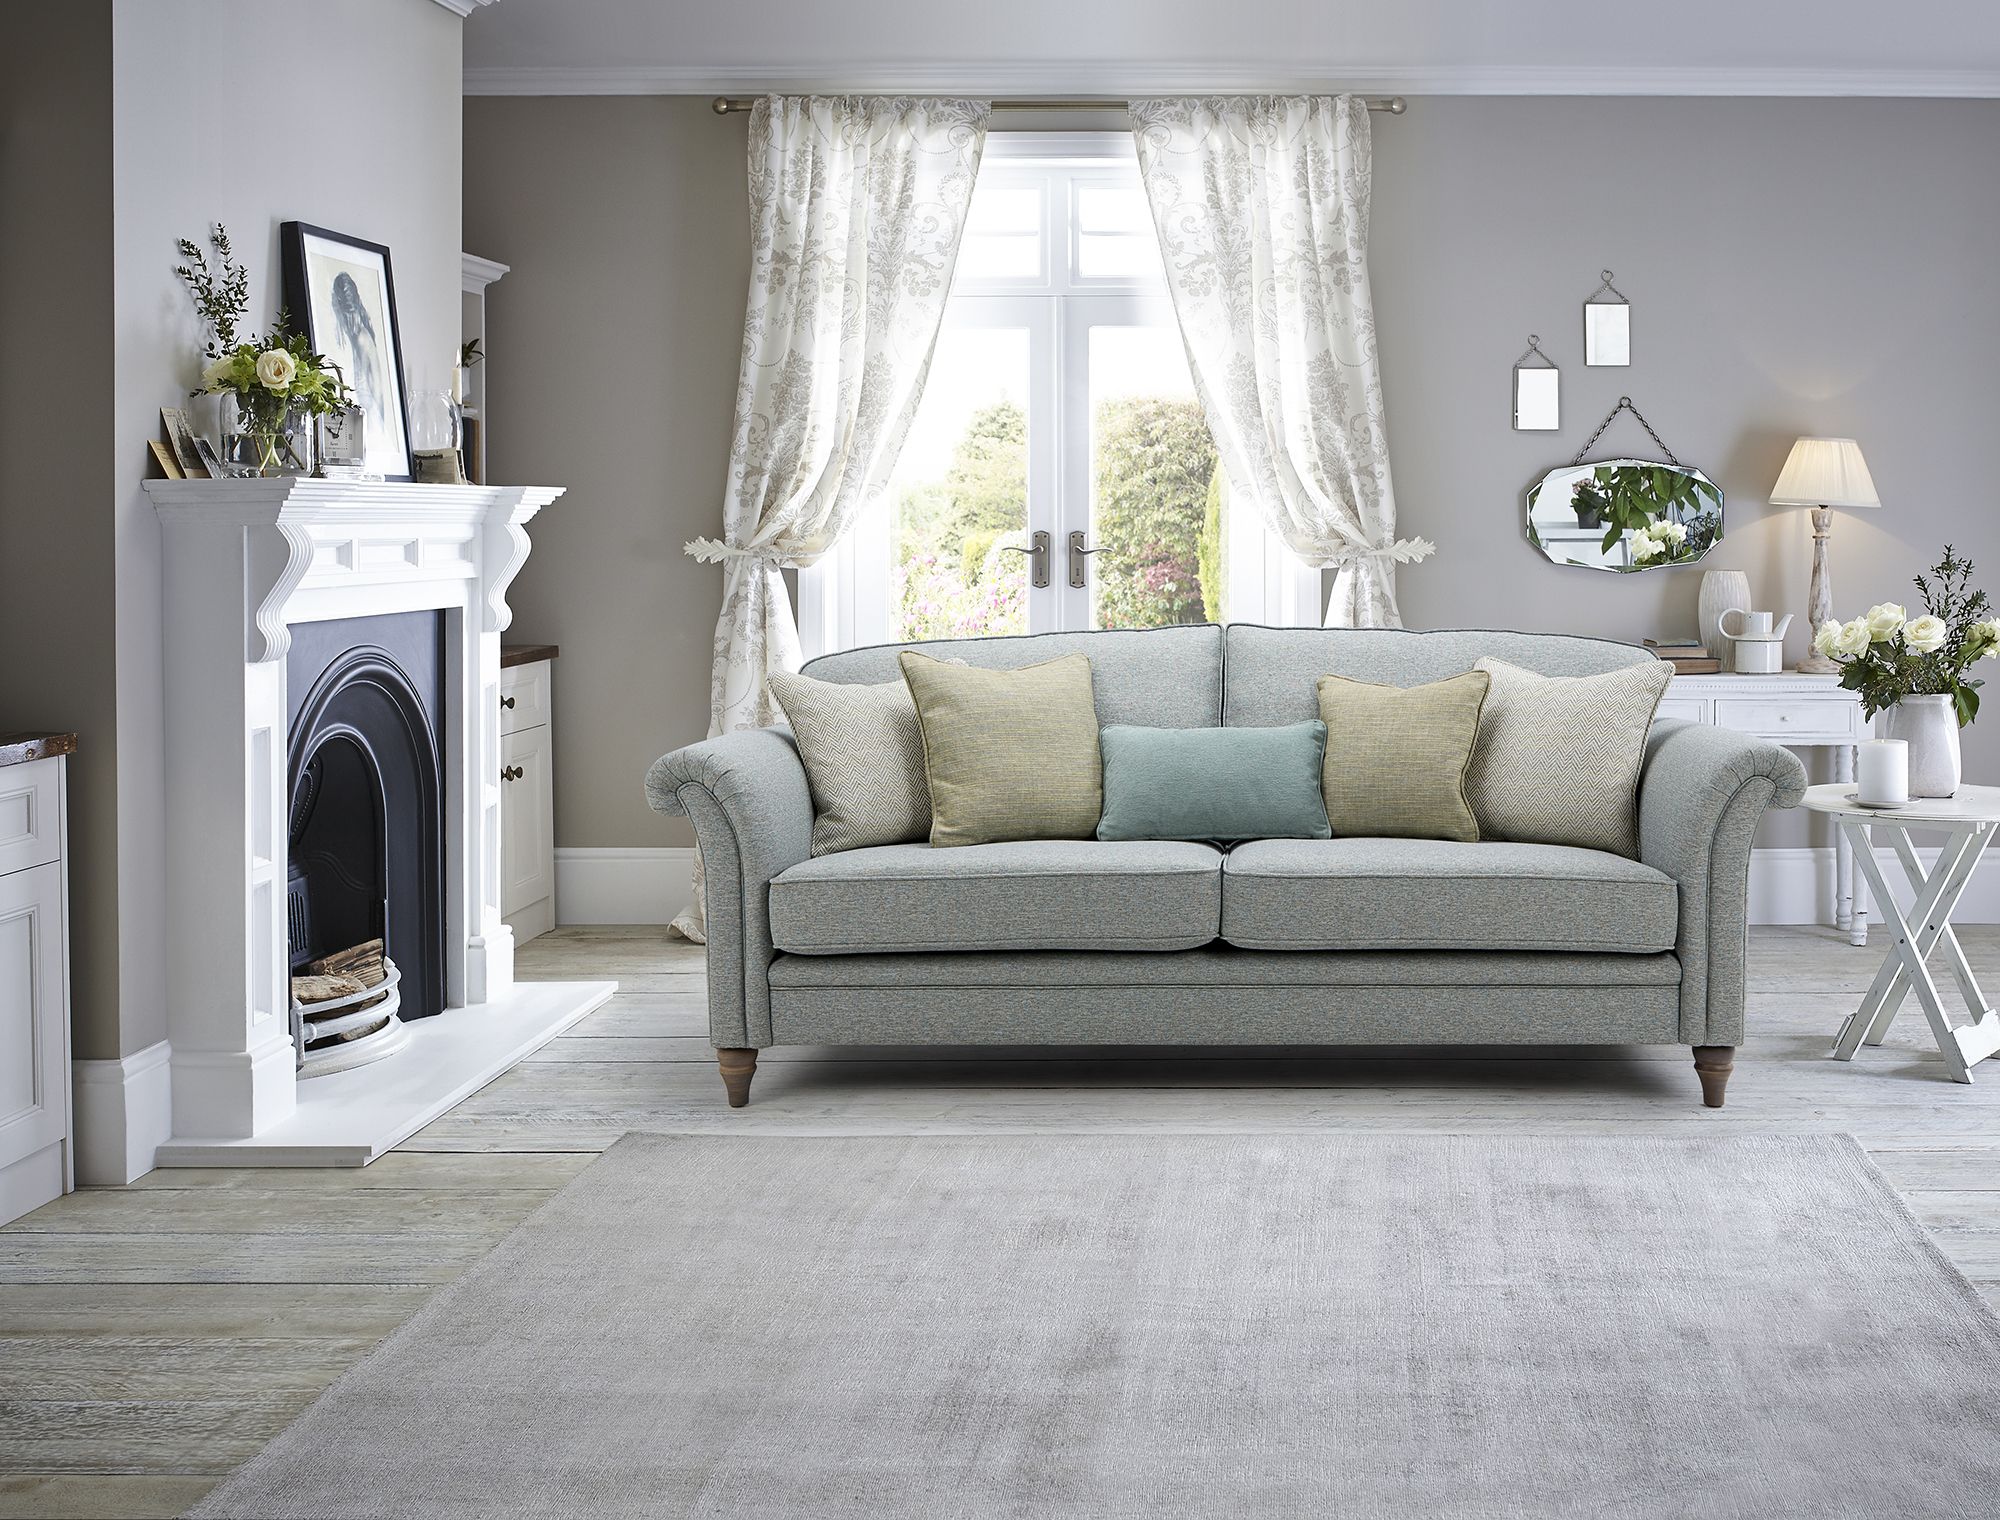 uddanne pyramide krøllet Introducing the new Woodstock sofa by Country Living x DFS